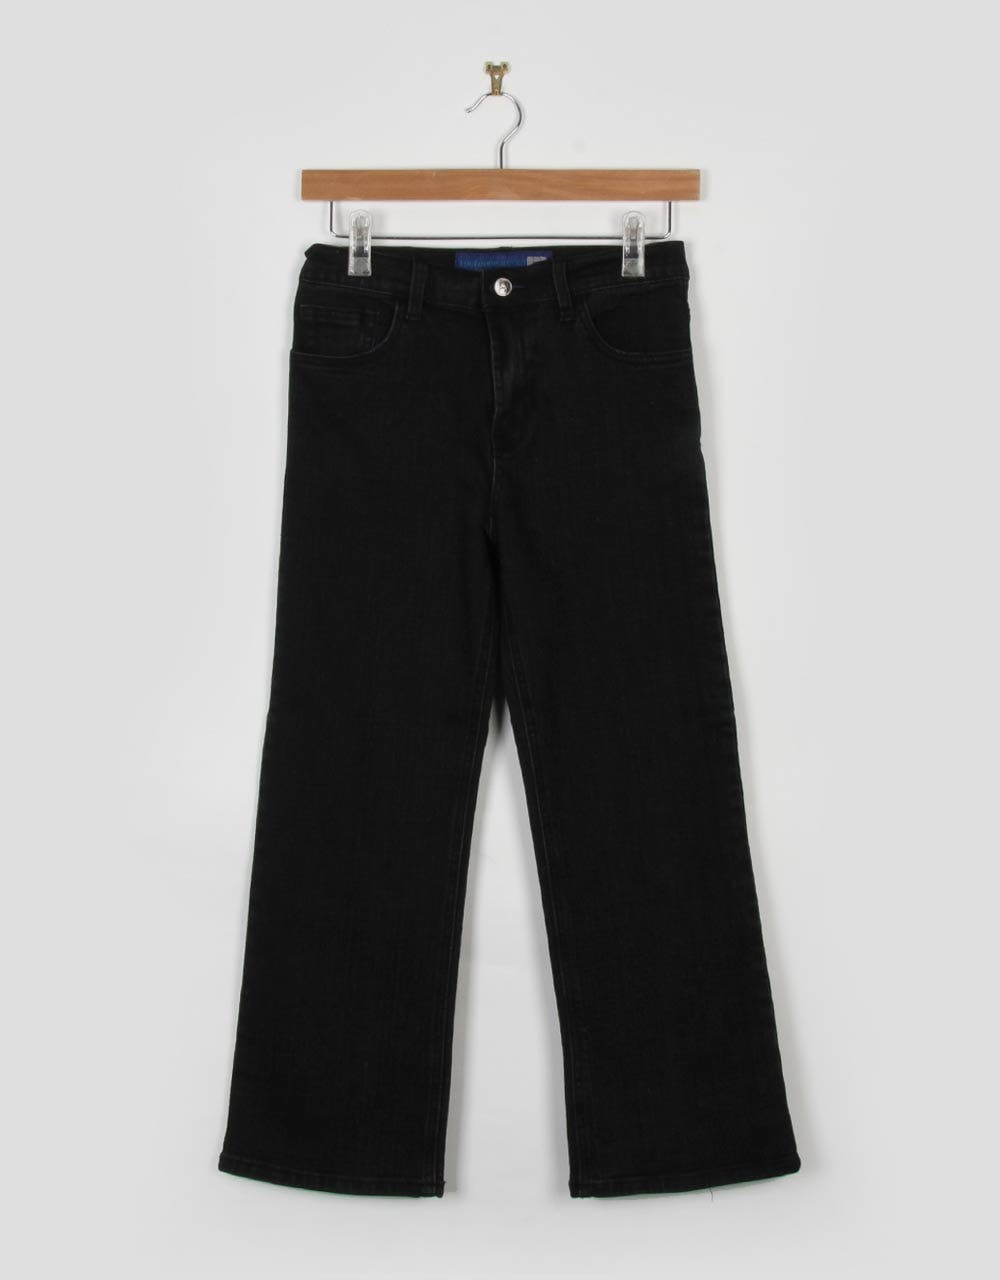 Route One Regular Fit Kids Jeans - Black